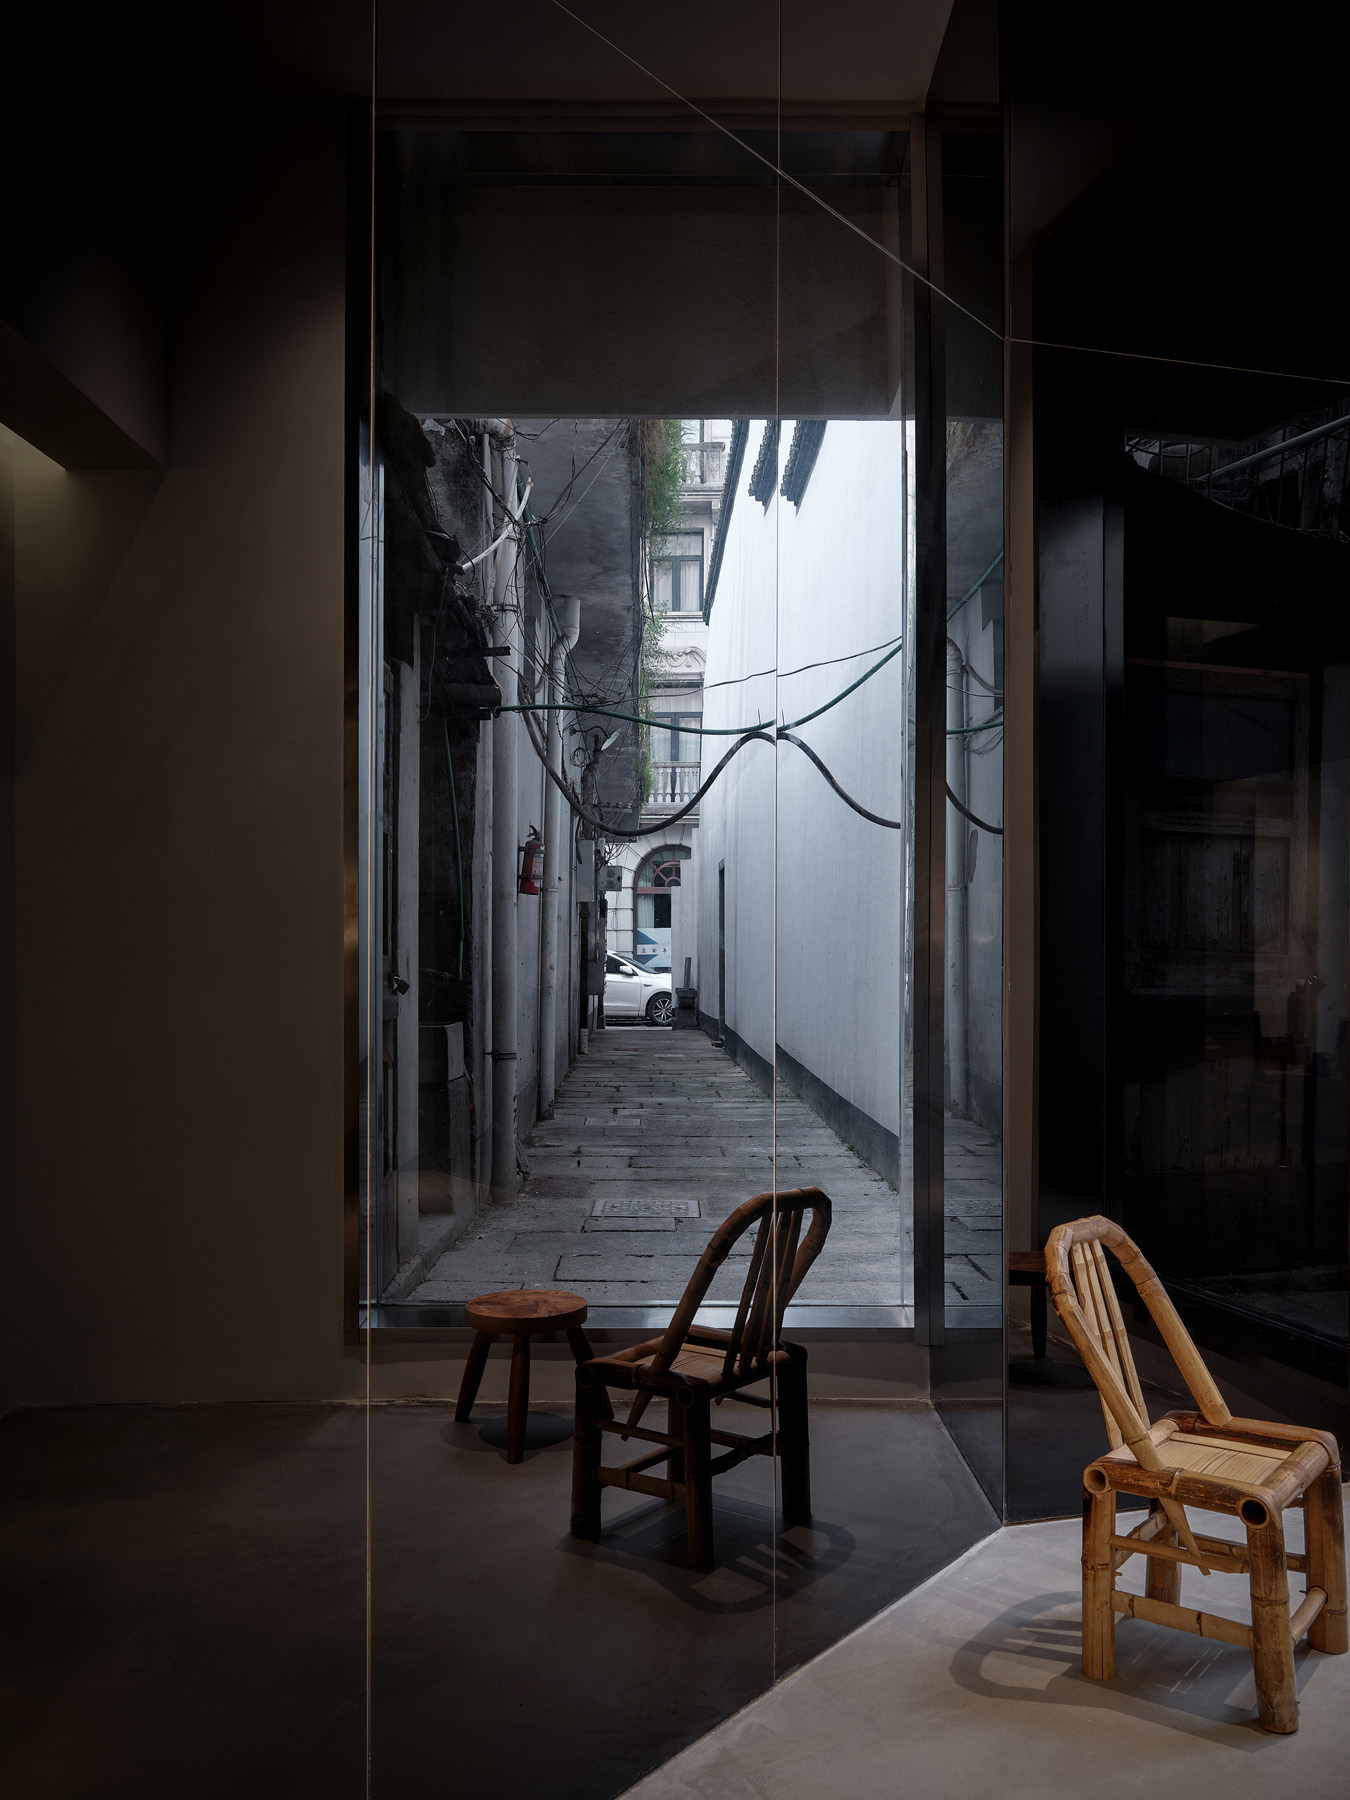 SCENERY ALLEY | Hangzhou Becó295 select store and creative space, by TEAM_BLDG, China 13